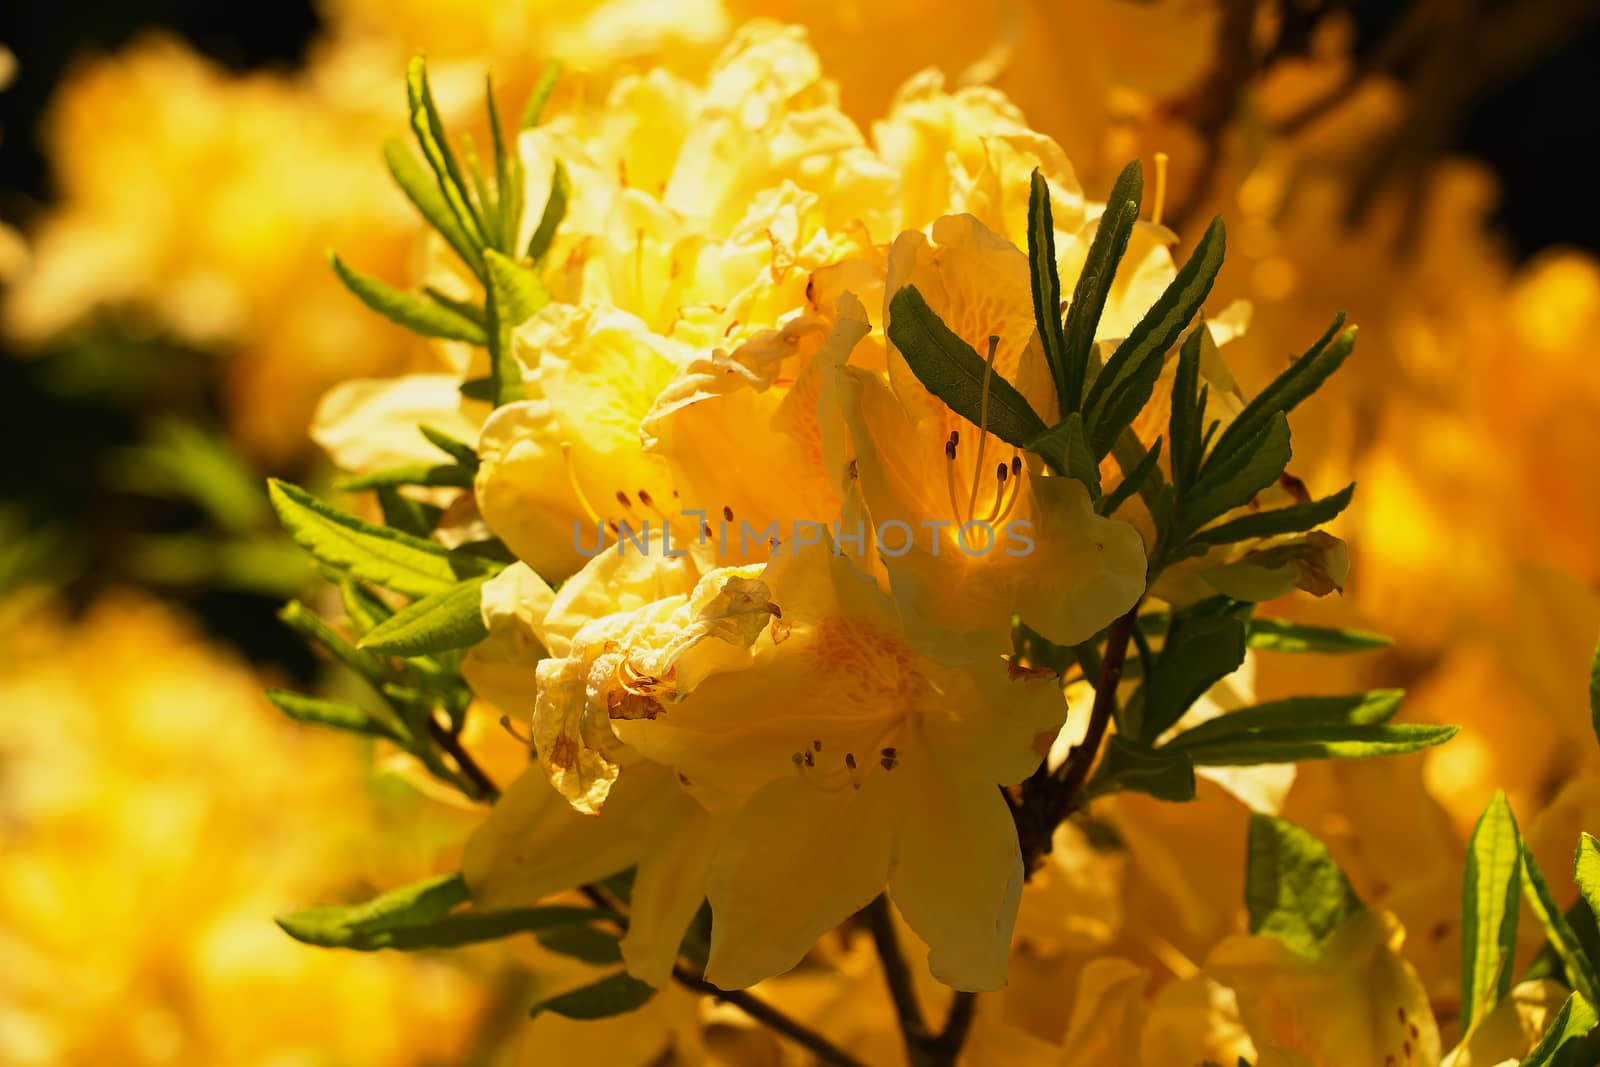 yellow flower Rhododendron

Photographed June 7, 2015, Janov nad Nisou, Czech Republic